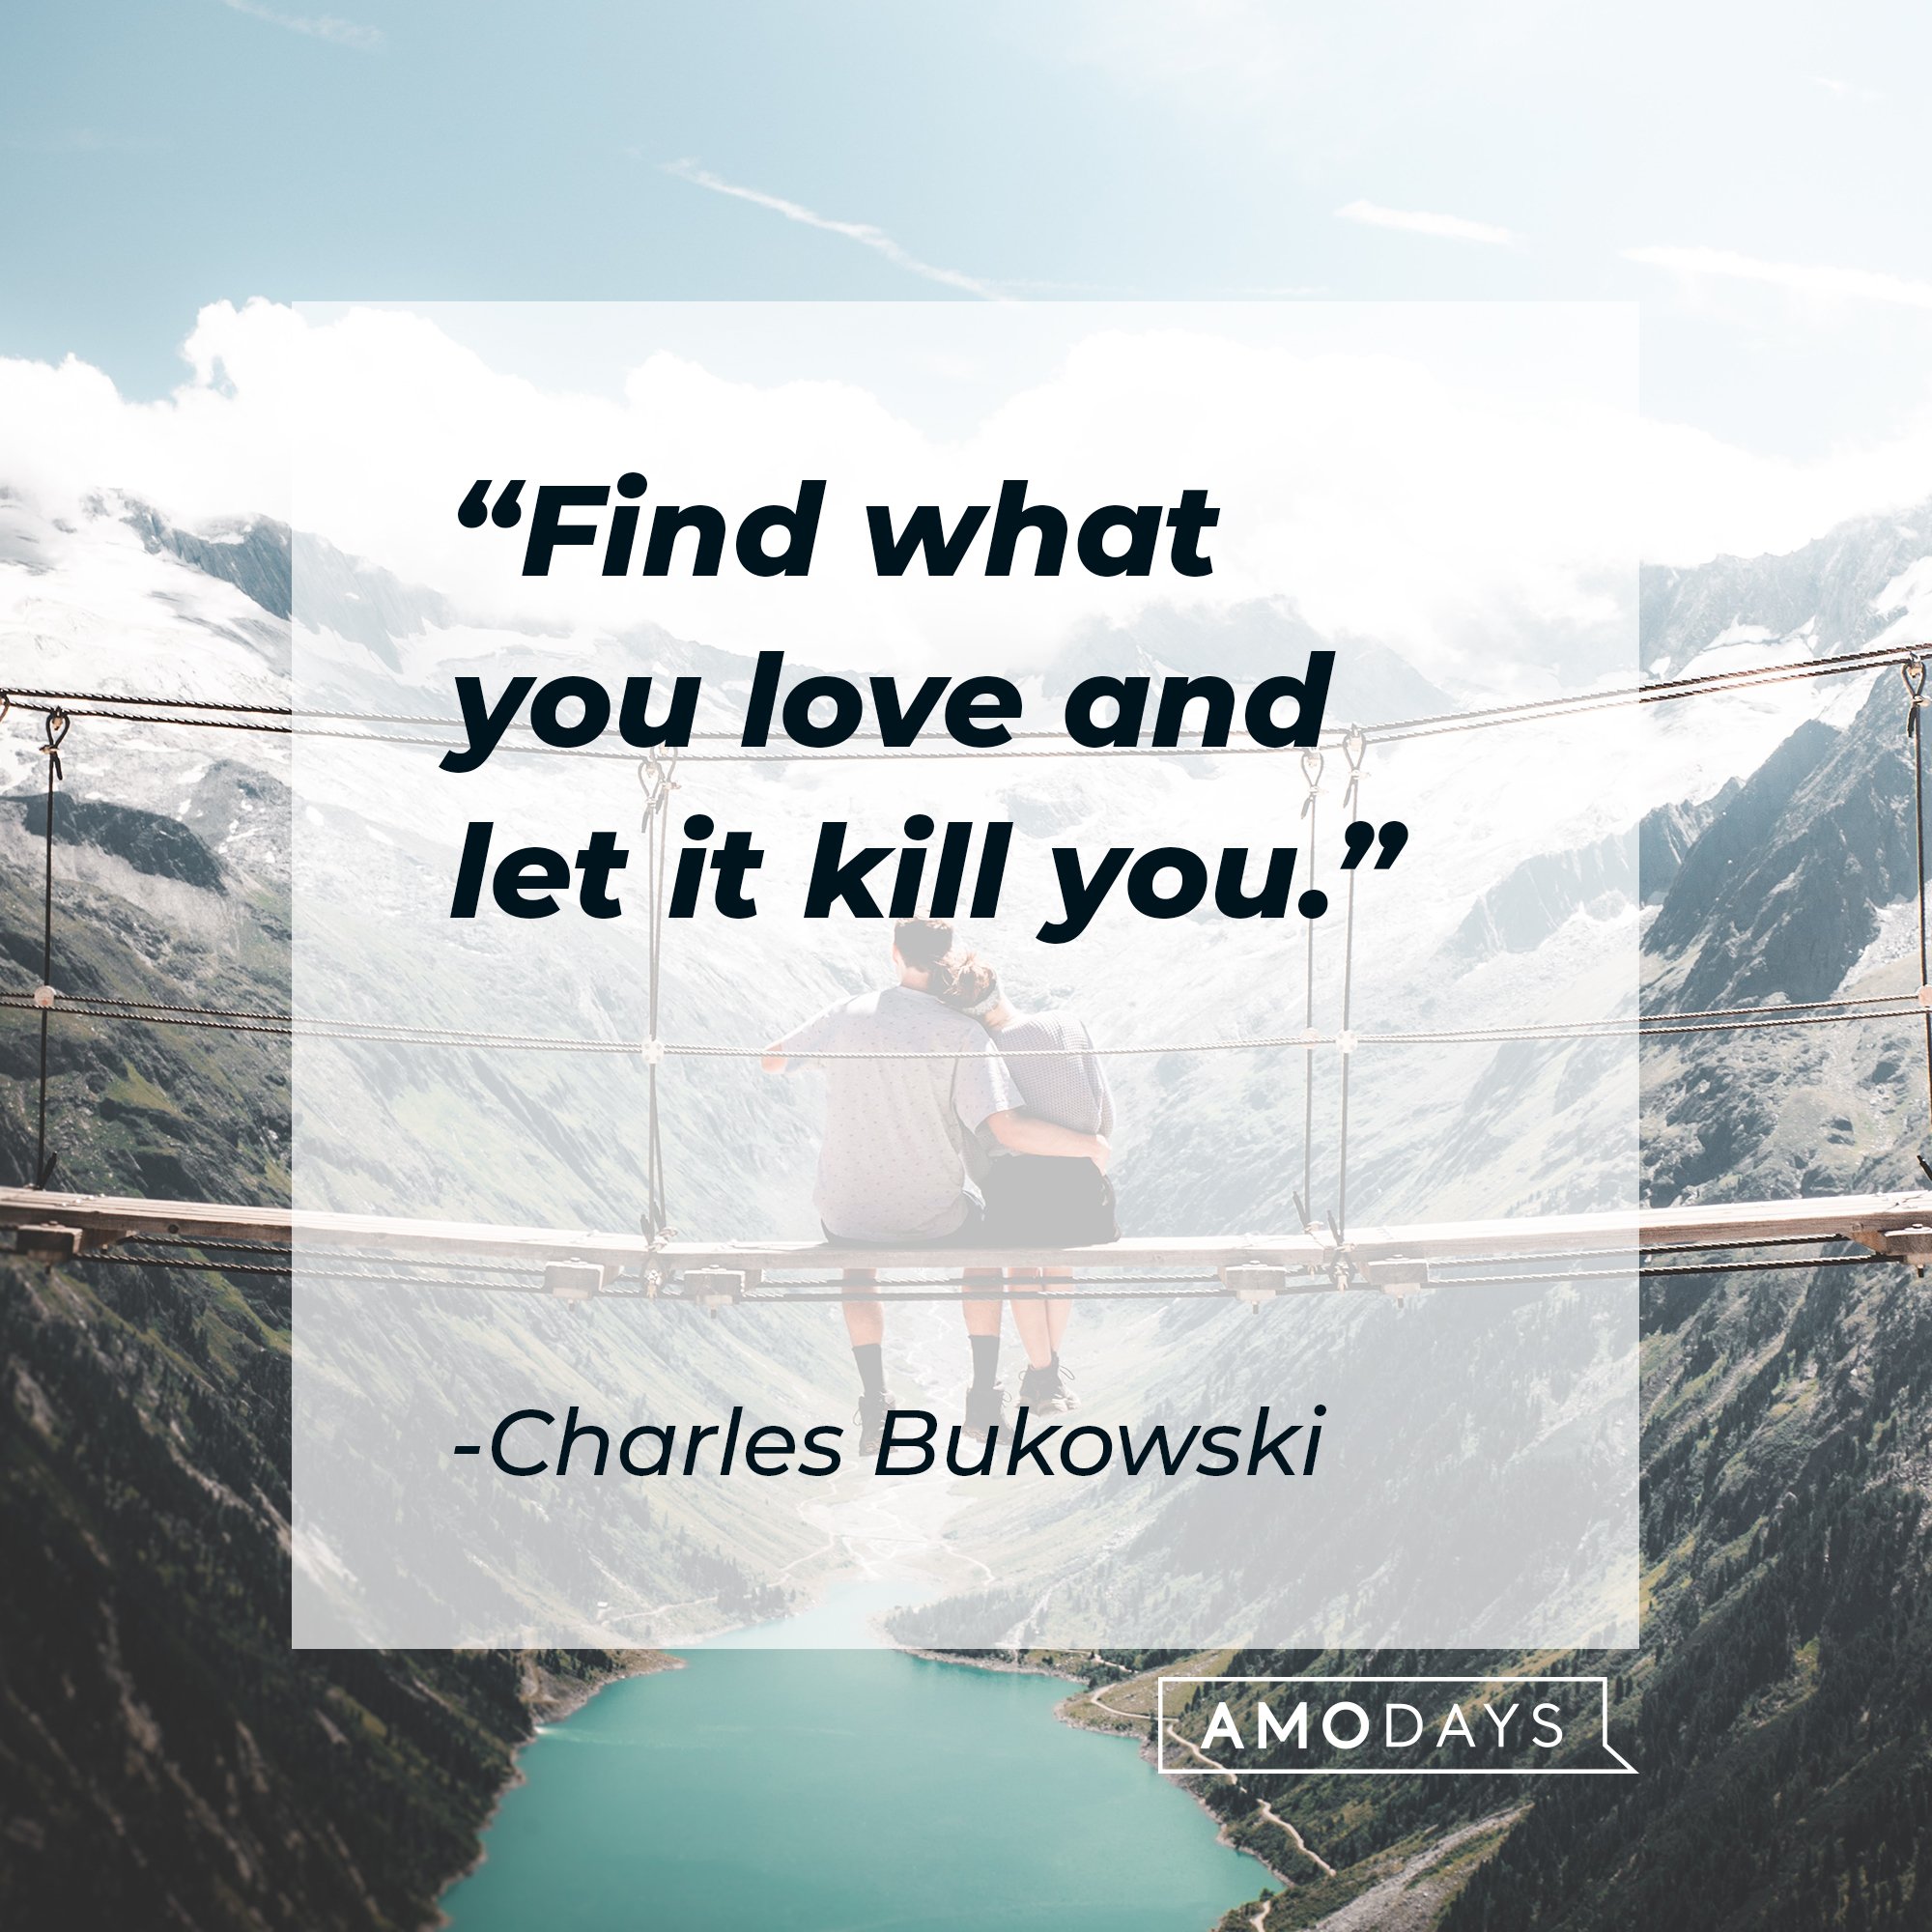 Charles Bukowski’s quote” "Find what you love and let it kill you." | Image: AmoDays 